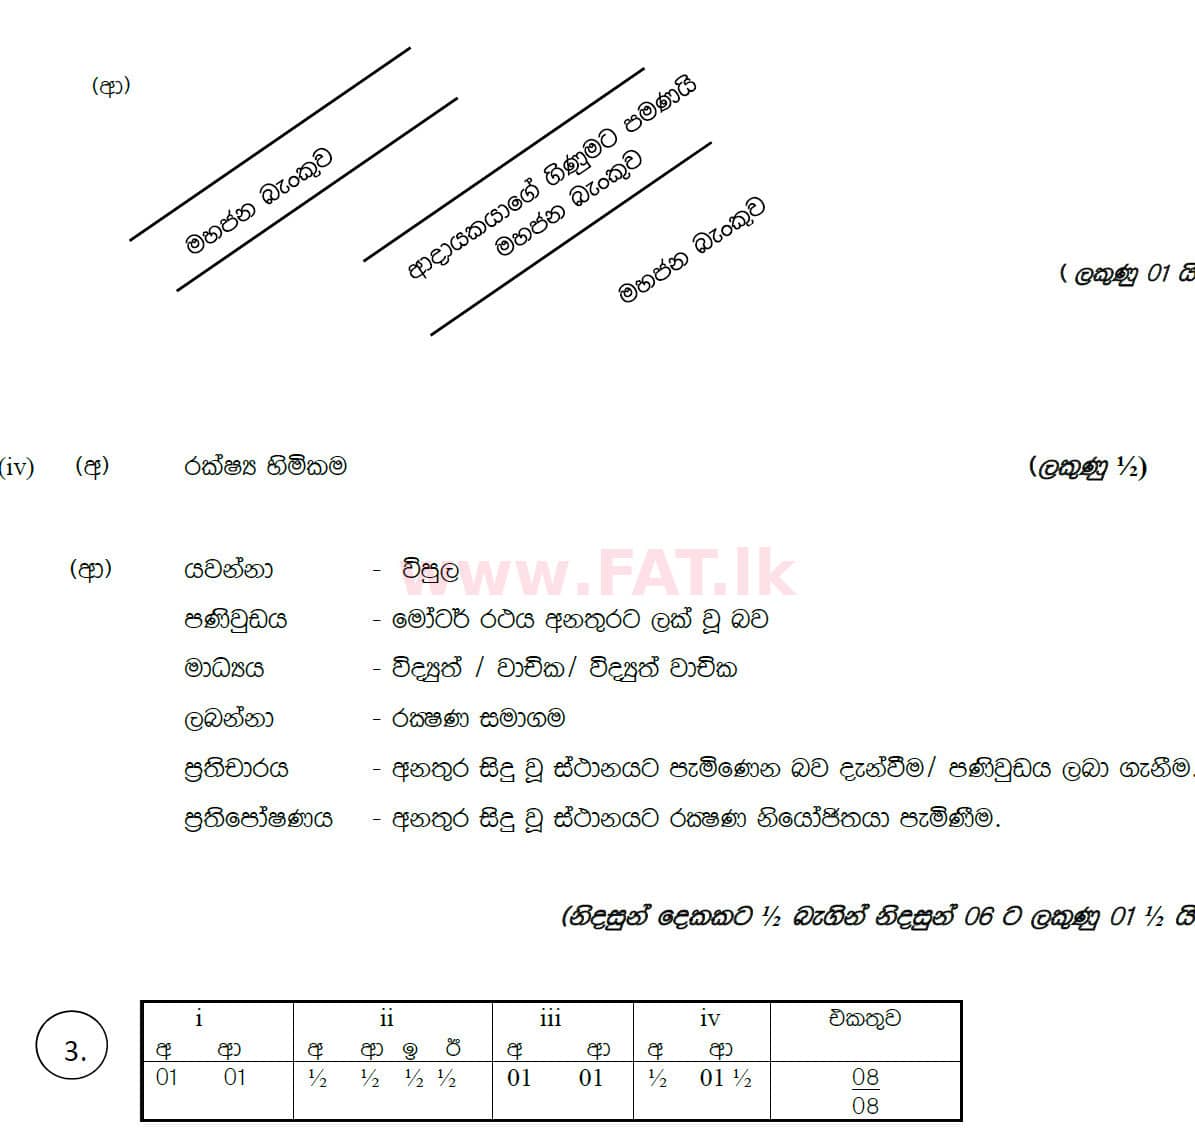 National Syllabus : Ordinary Level (O/L) Business and Accounting Studies - 2019 March - Paper II (සිංහල Medium) 3 5892